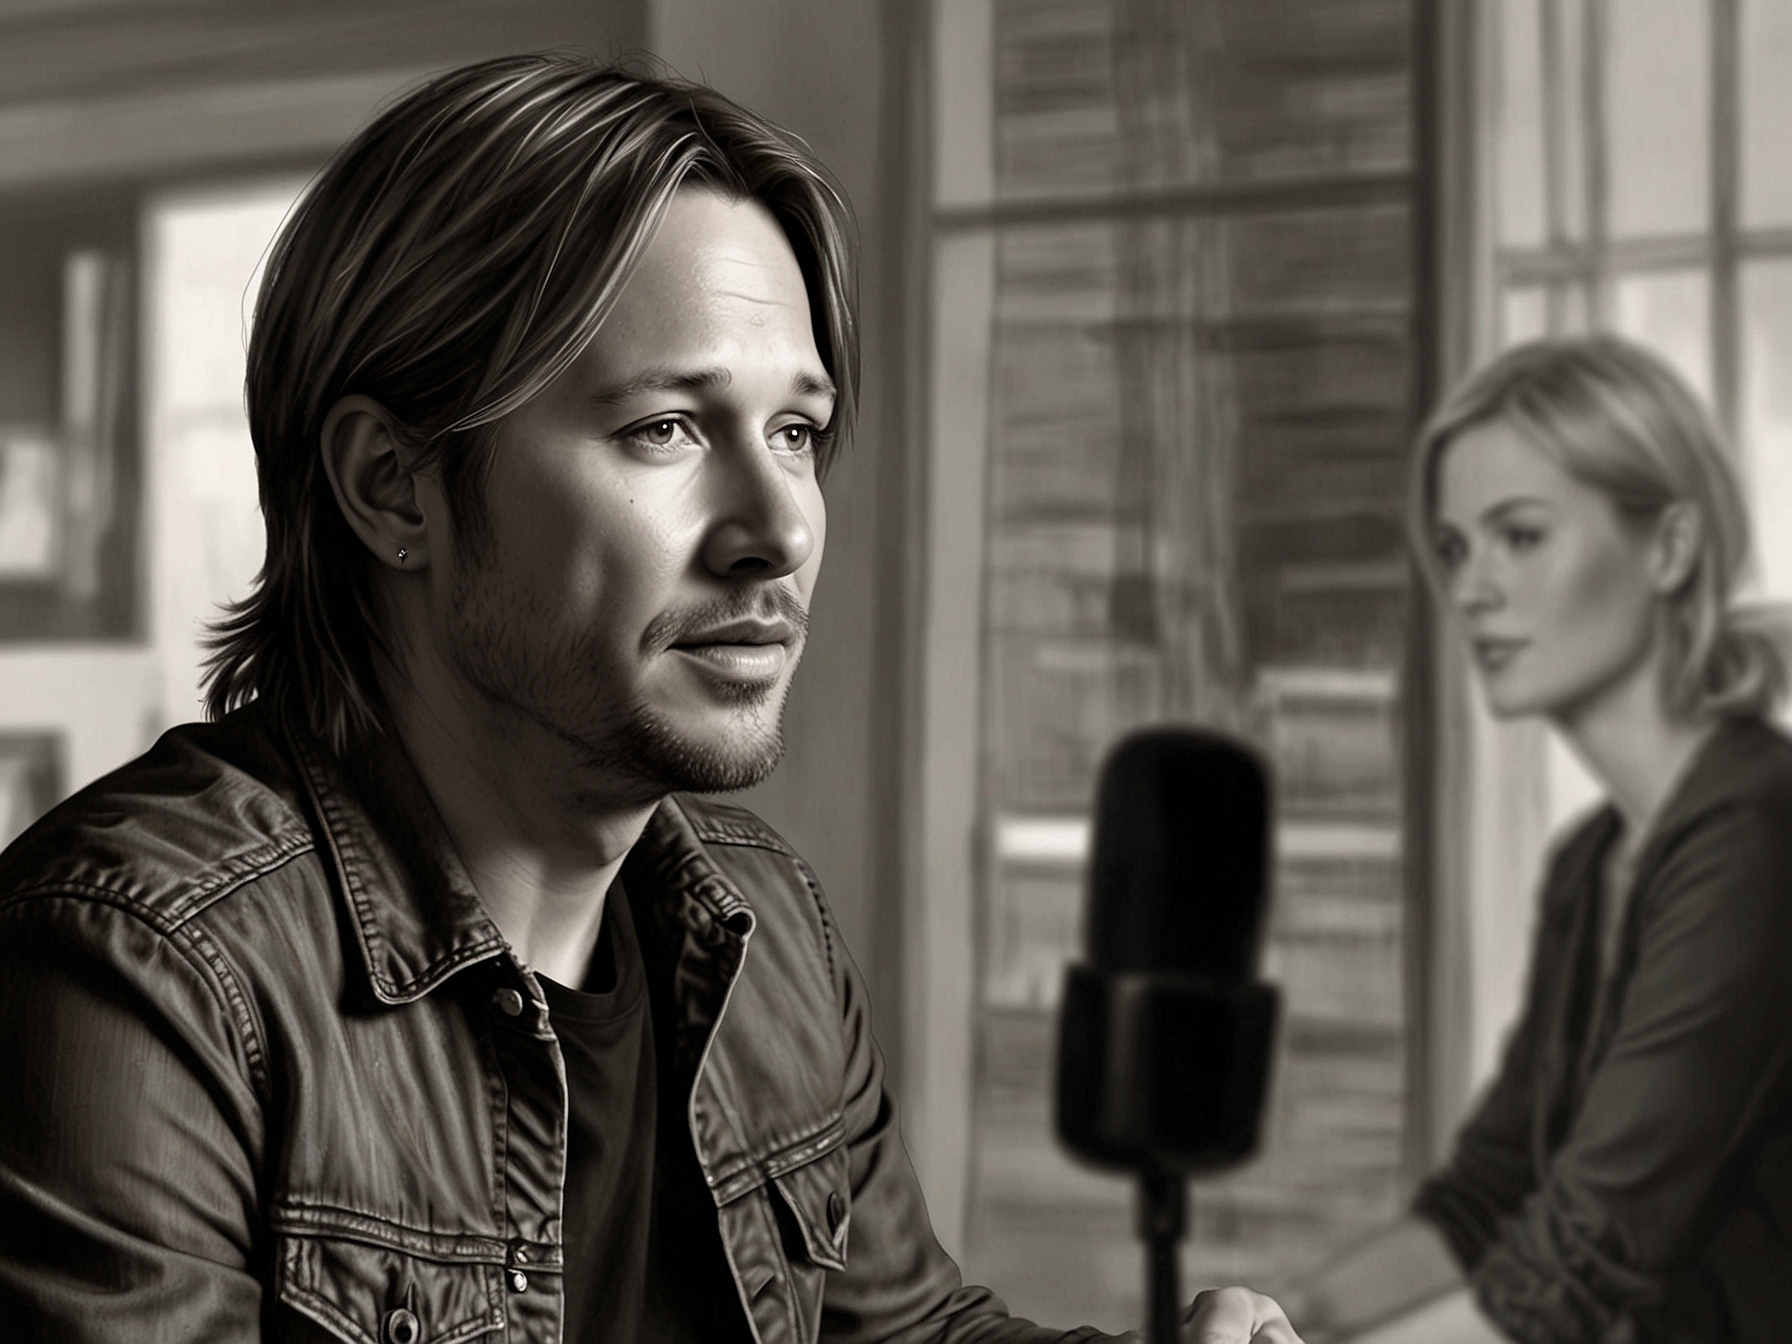 Keith Urban passionately speaking at an interview, reflecting on his difficult journey with substance abuse and how Nicole Kidman's support was crucial for his recovery and their strong marriage.